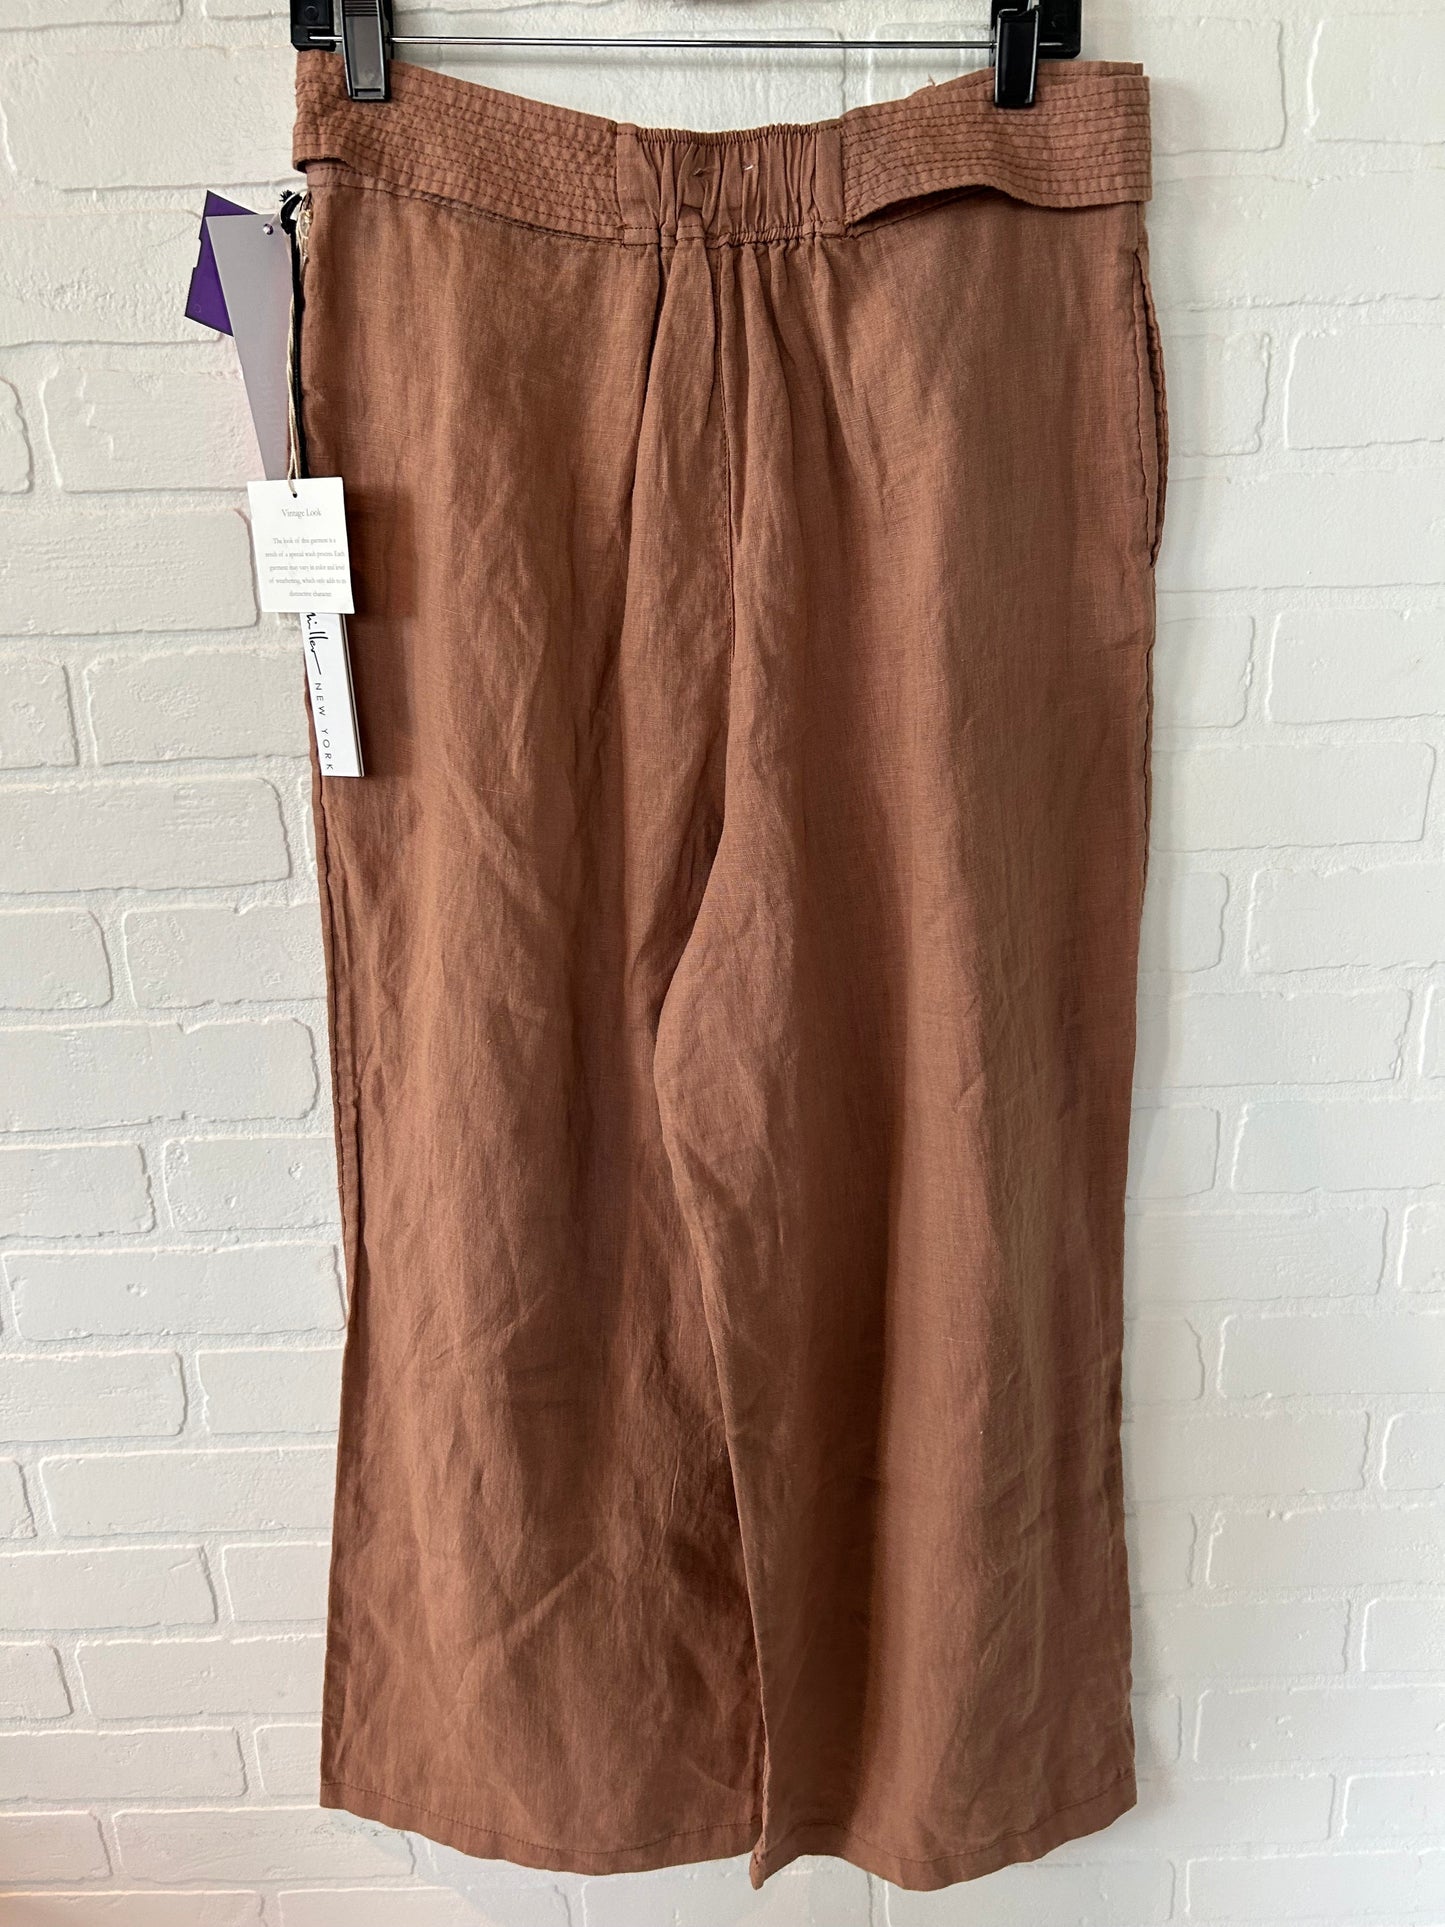 Brown Pants Cargo & Utility Nicole Miller, Size 10